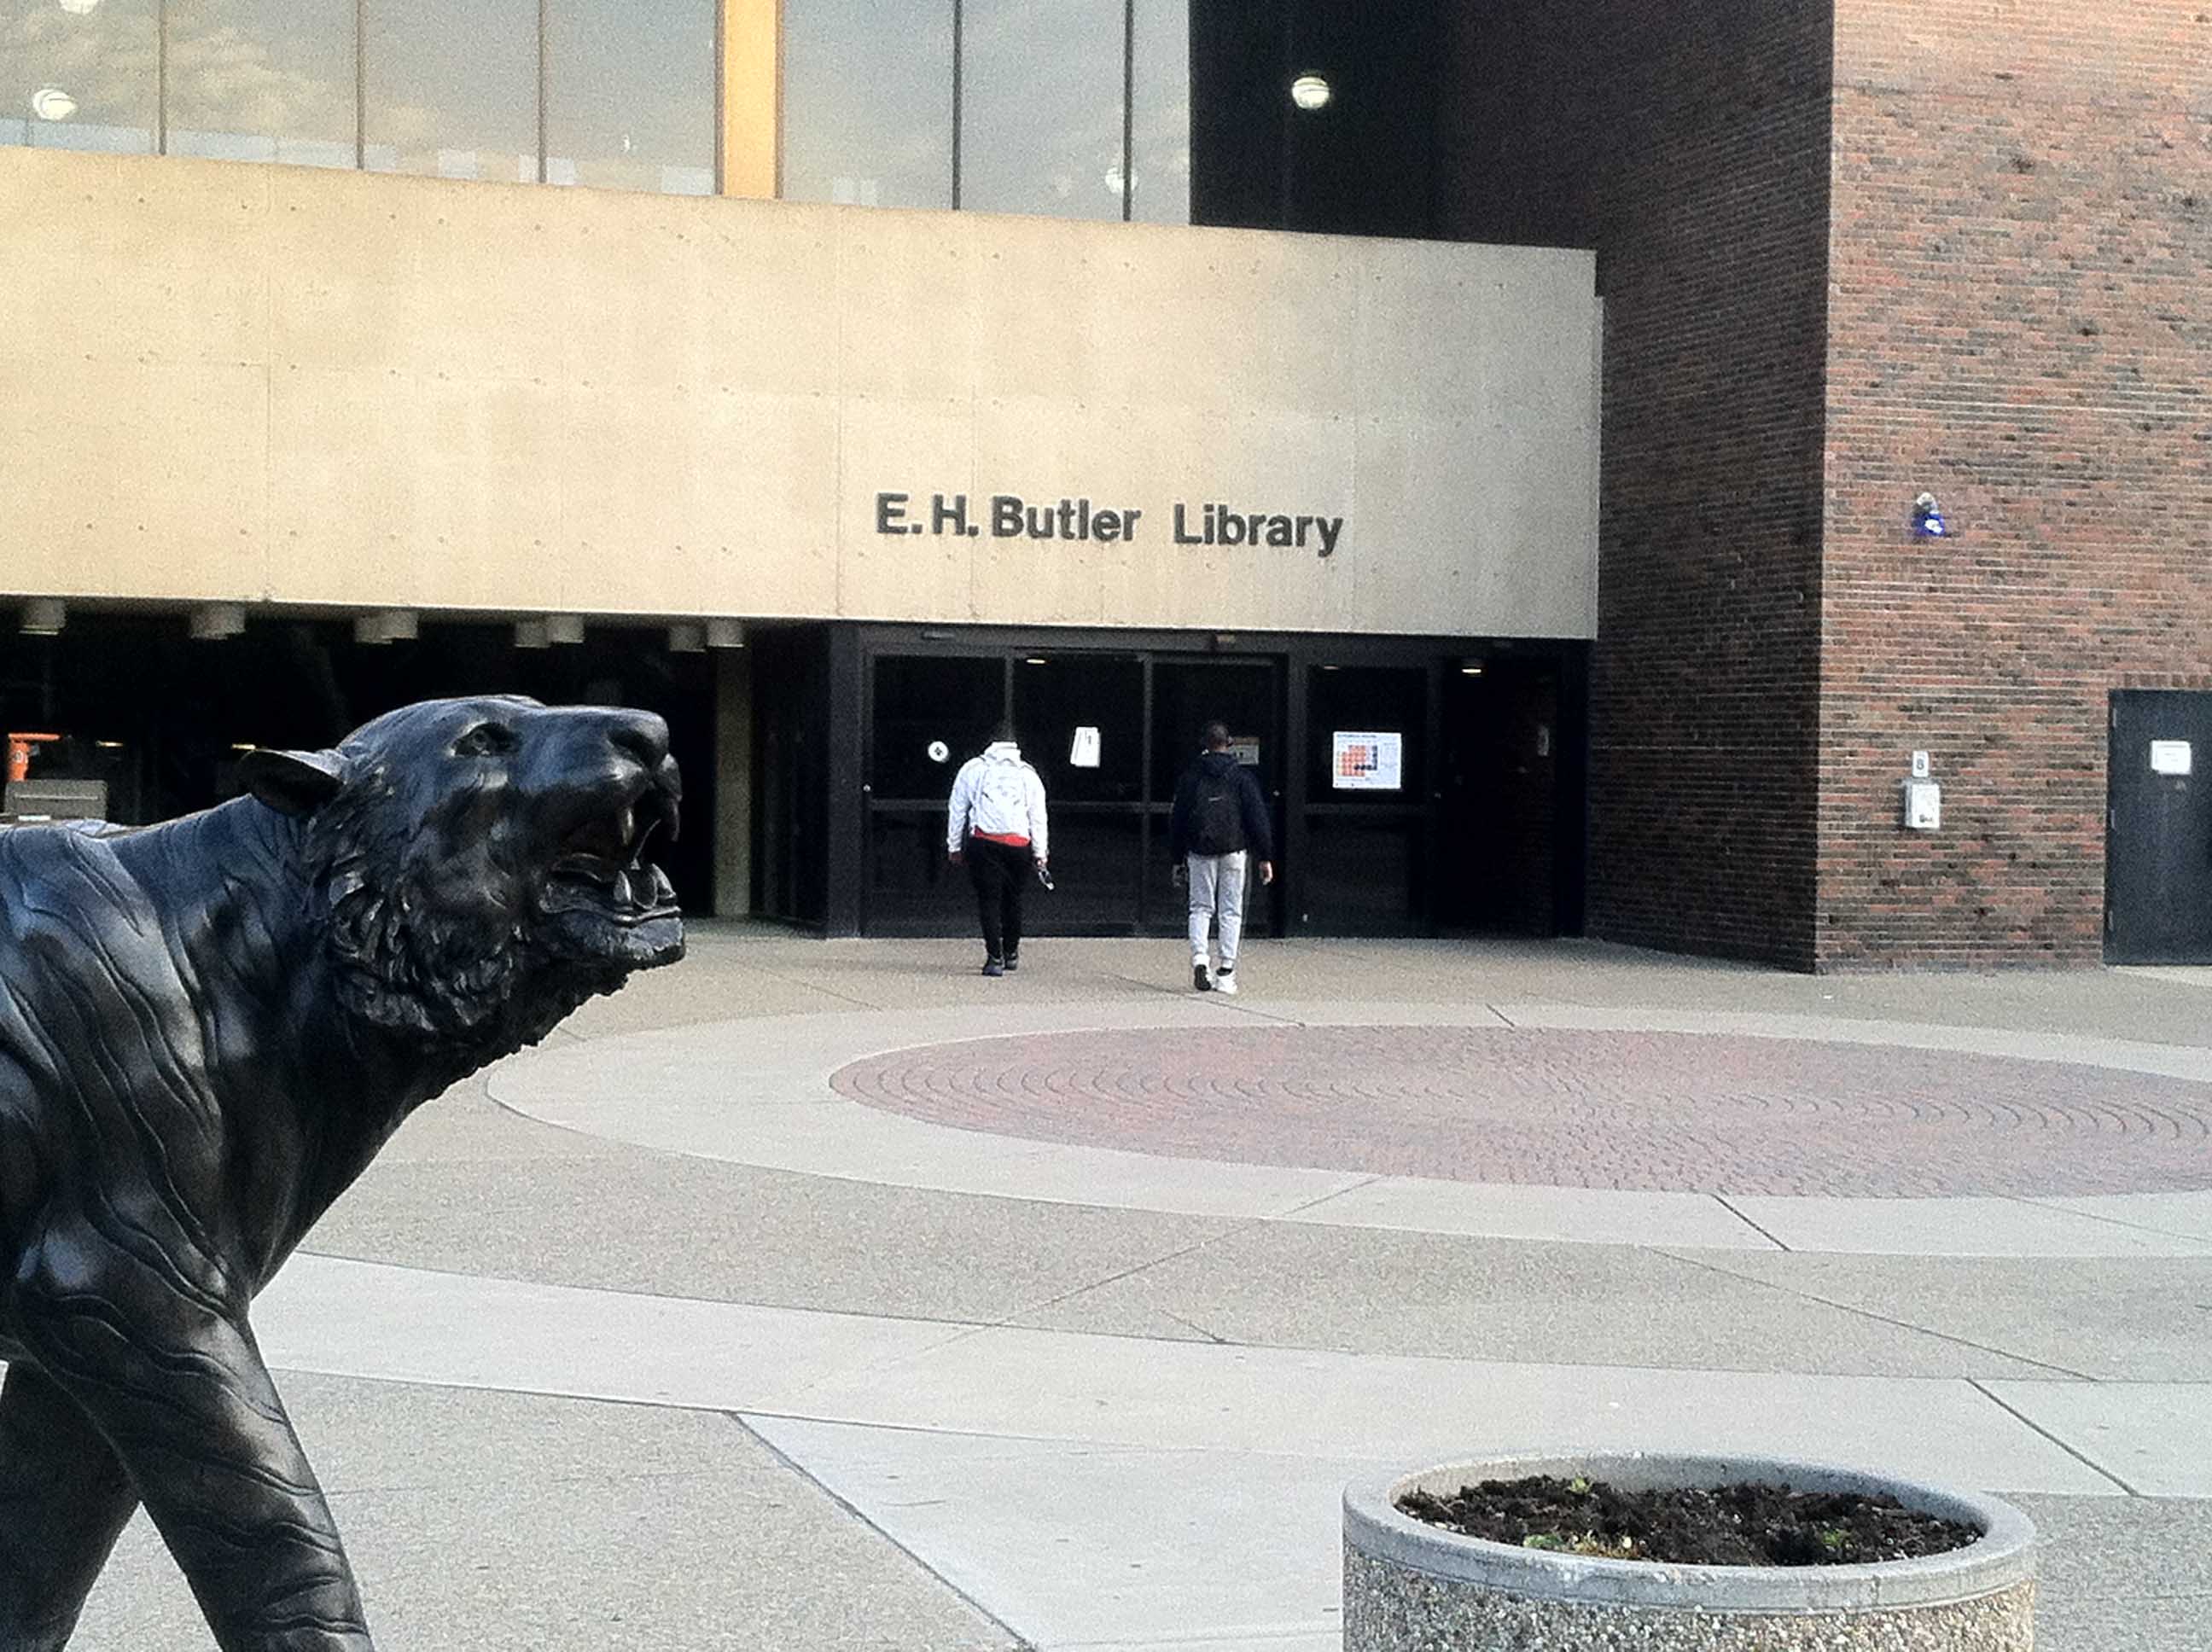 Drikke sig fuld lektie film The E.H. Butler Library to receive $7.83 million in renovations - The Record